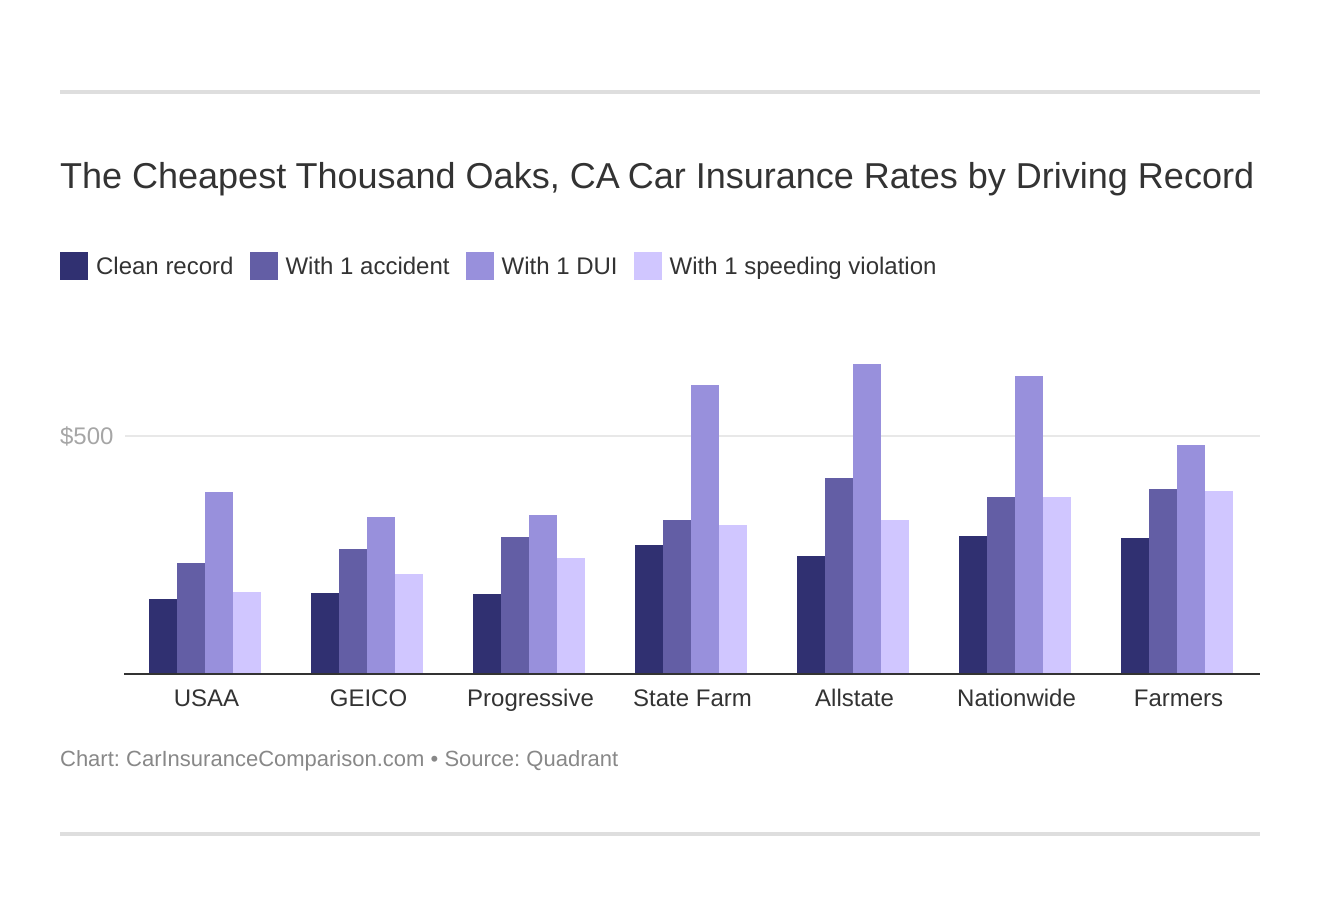 The Cheapest Thousand Oaks, CA Car Insurance Rates by Driving Record